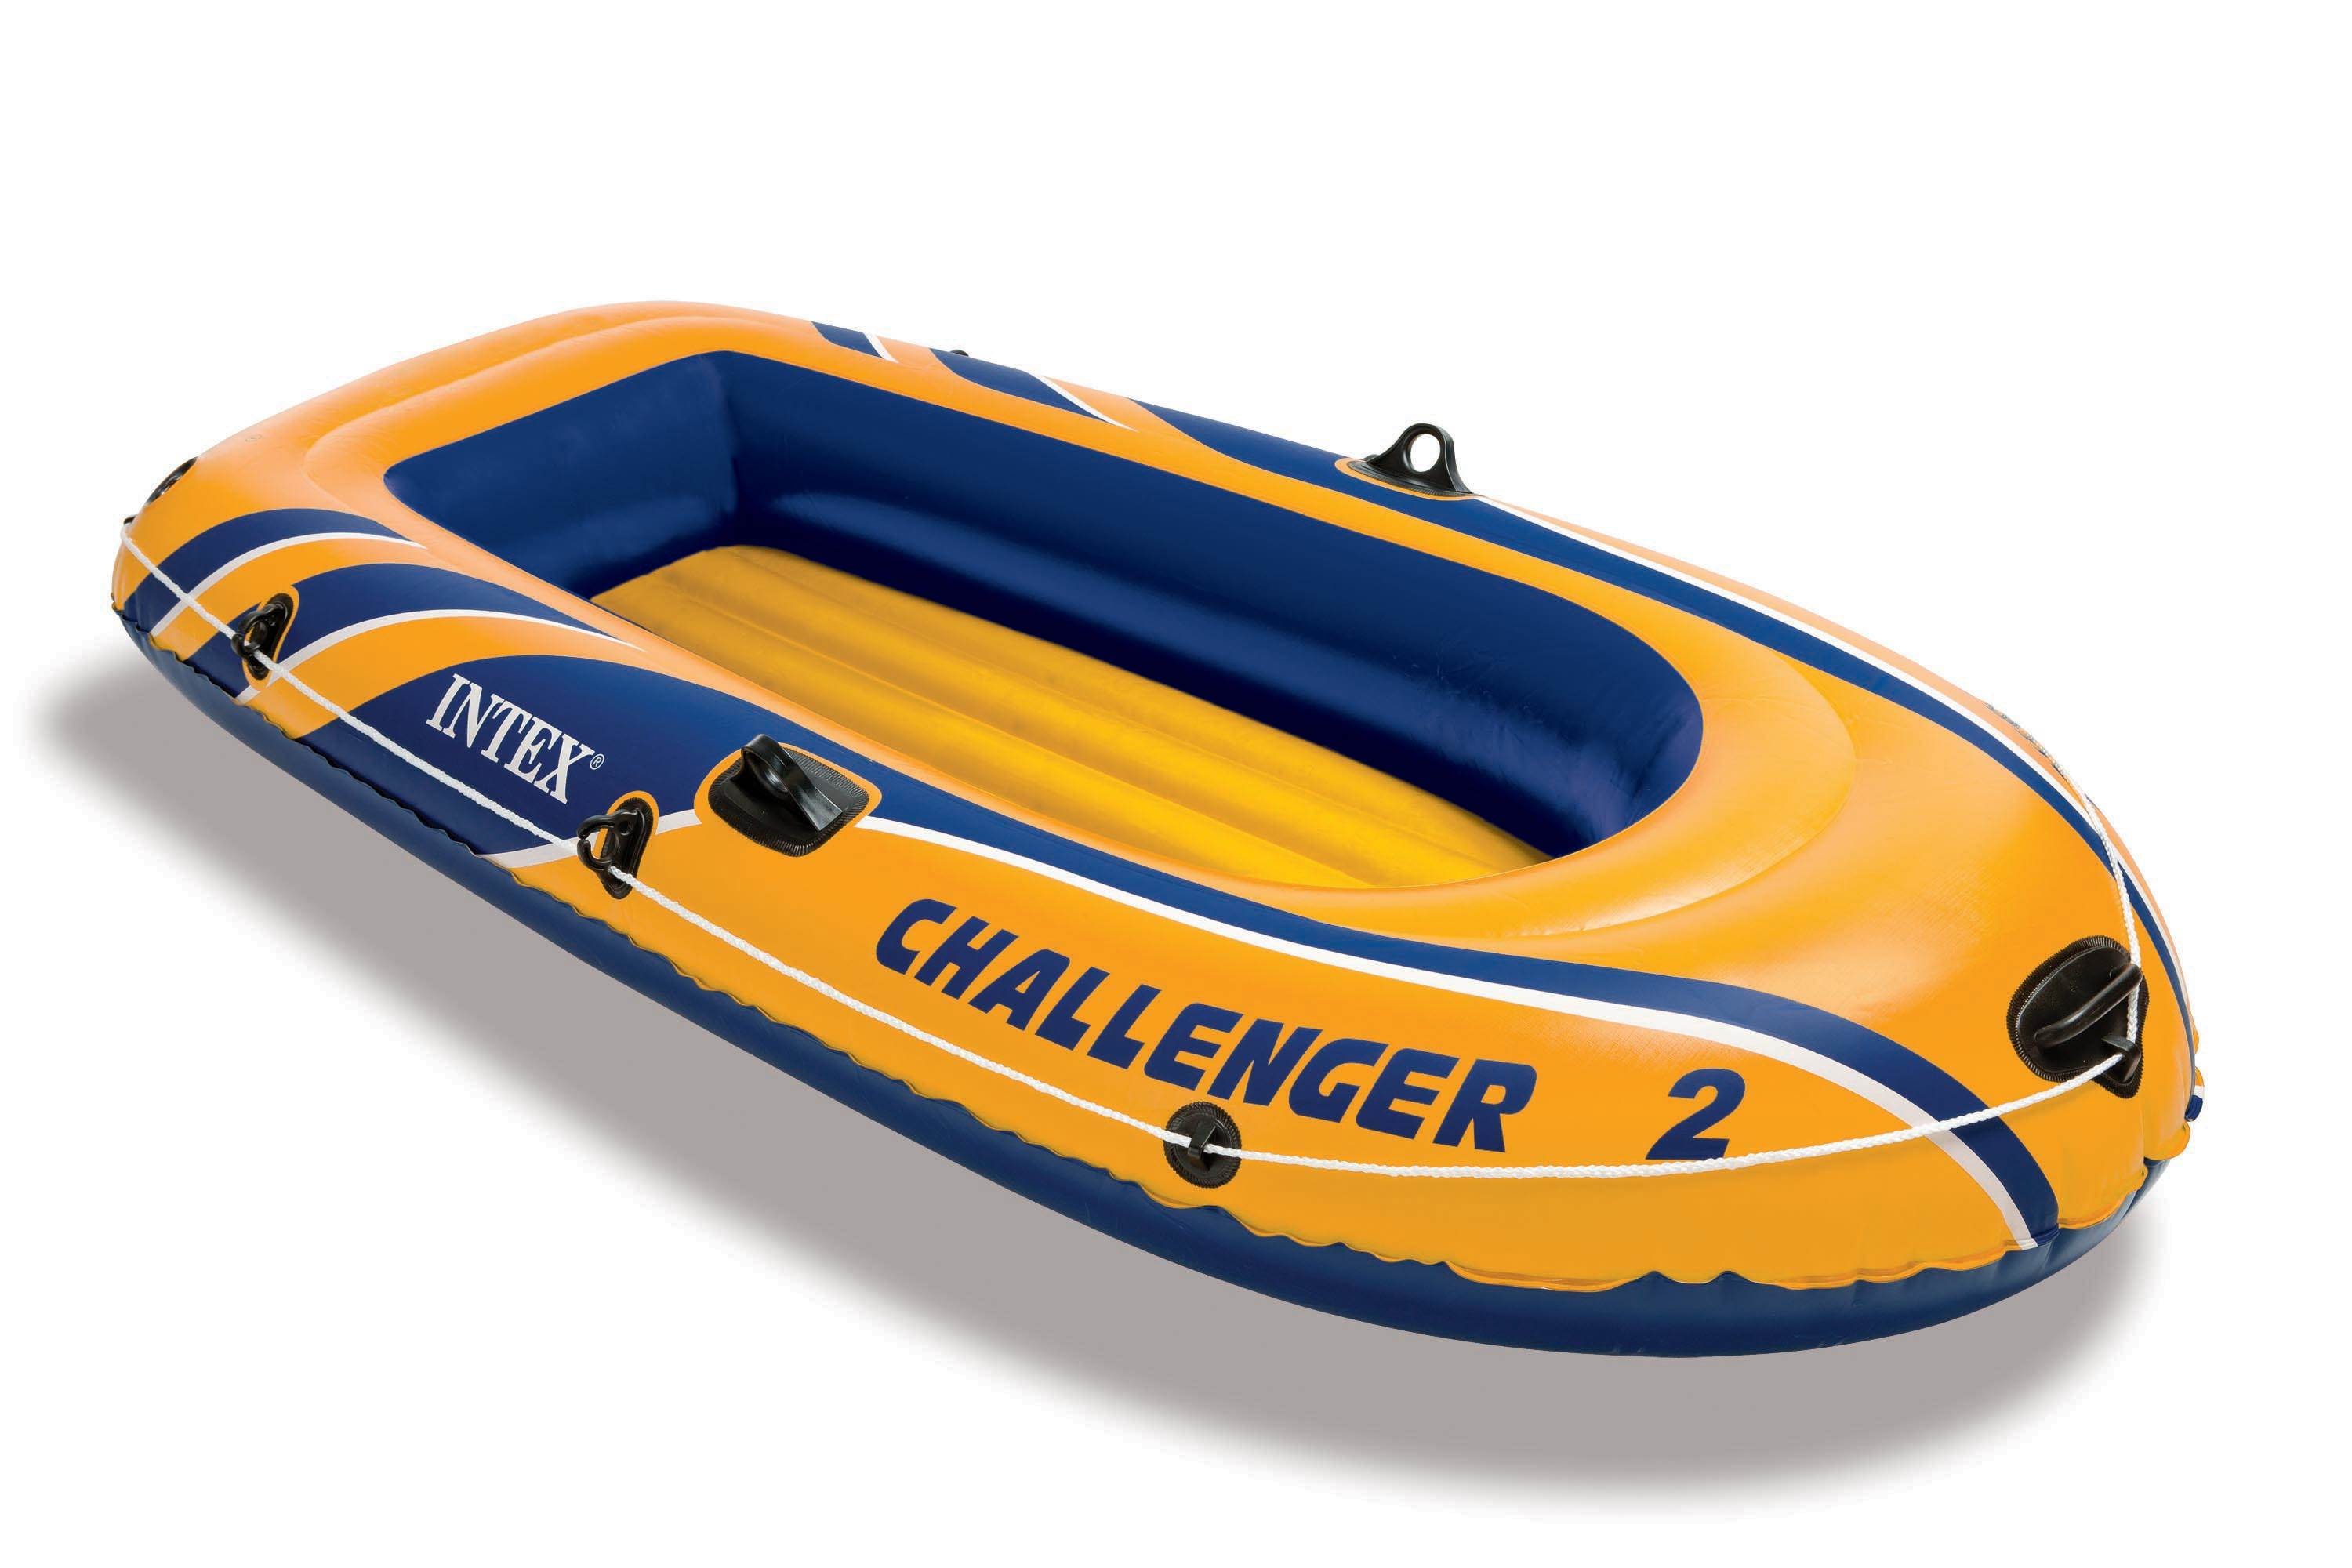 Intex Recreation Inflatable Challenger Boat Set - 2 seater